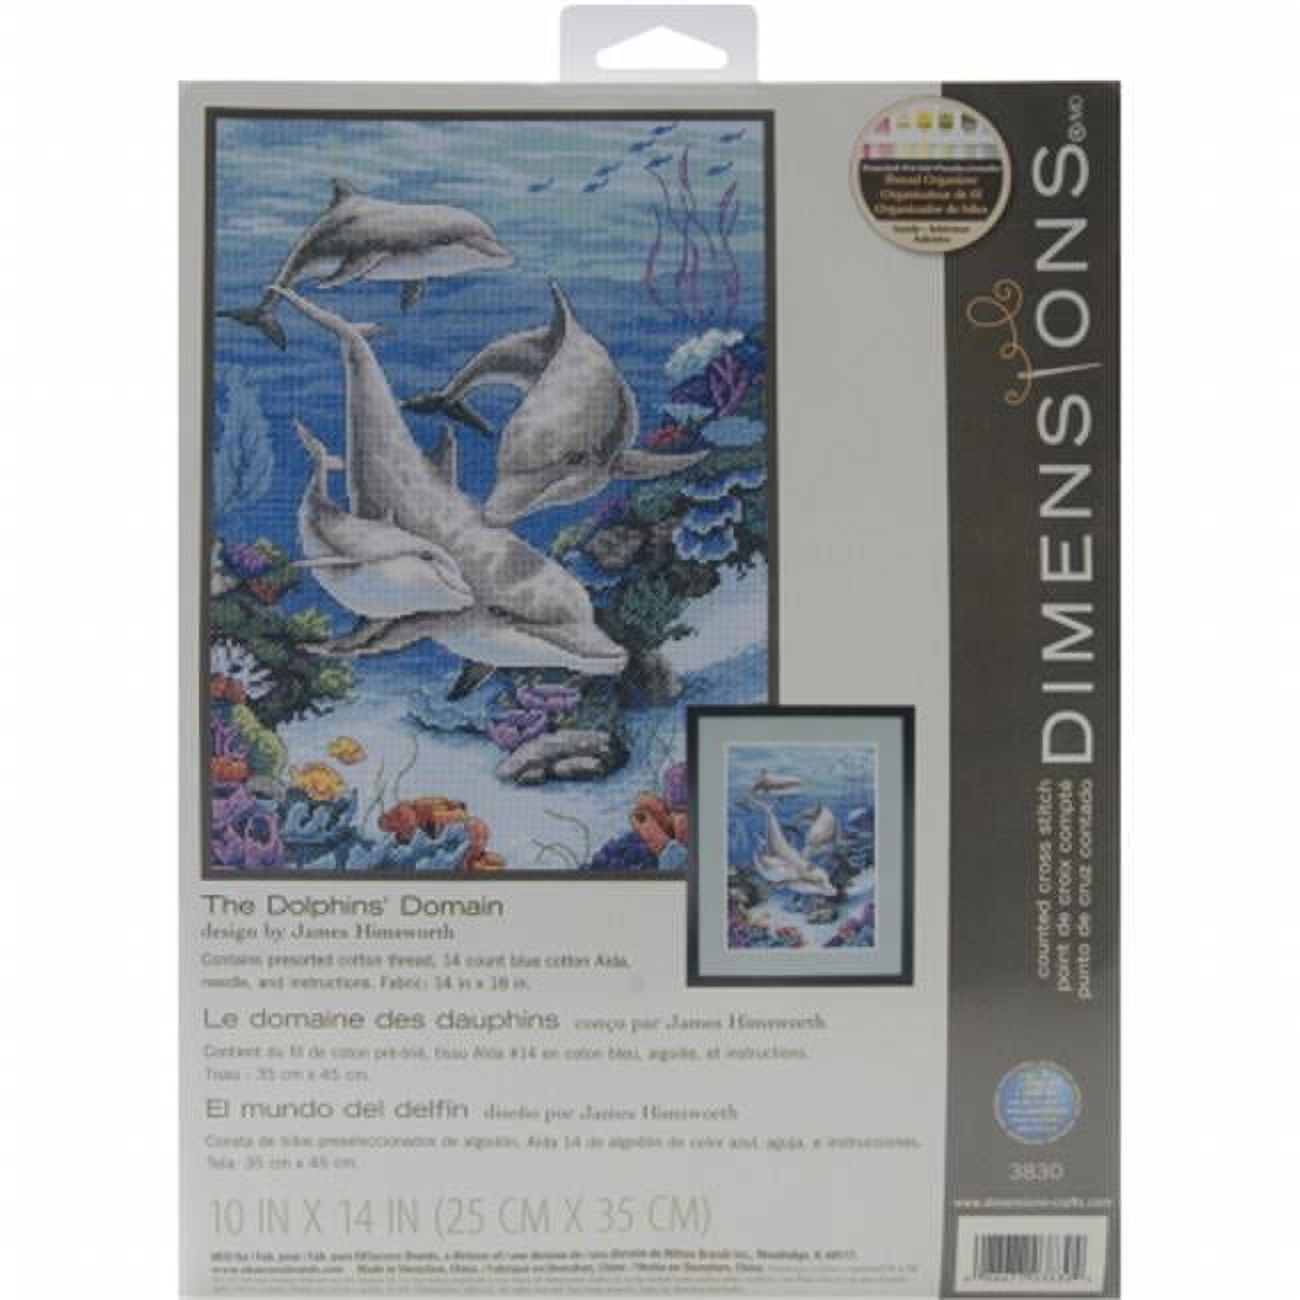 Dimensions Needlecrafts 3830 Dolphins' Domain Counted Cross Stitch Kit - image 1 of 3